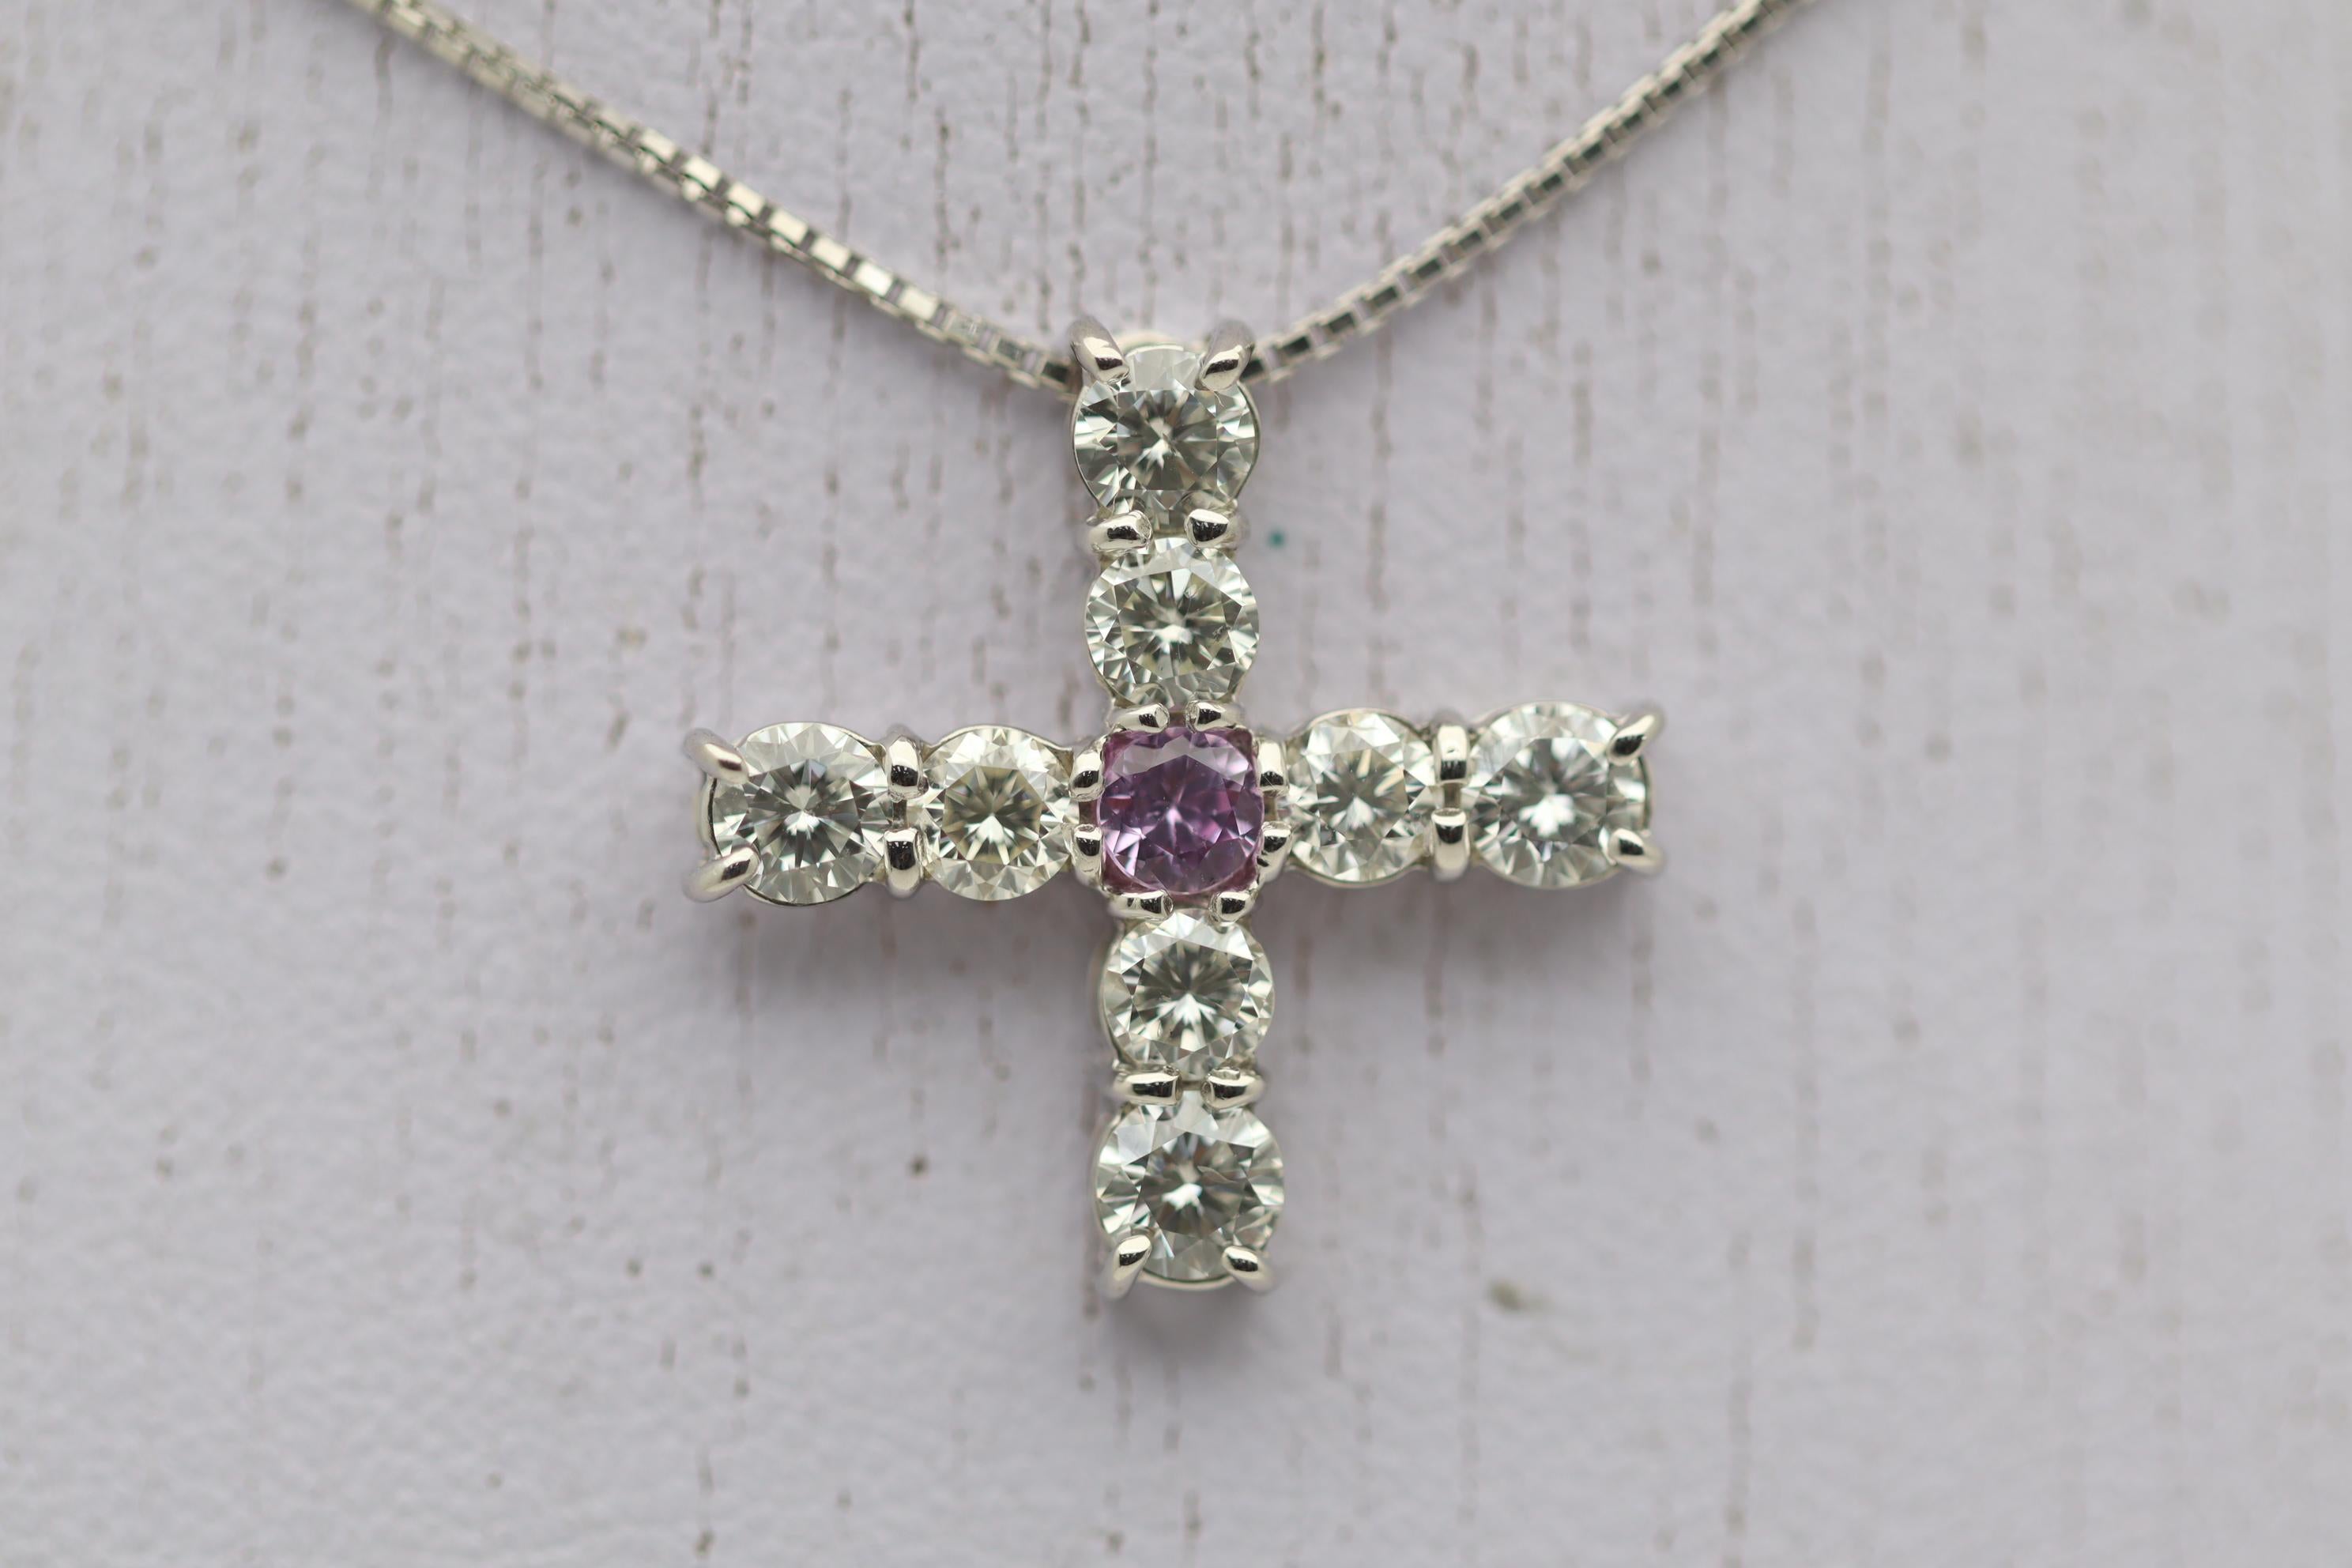 A cross designed pendant featuring 8 large diamonds and a single pink sapphire in its center. The diamonds weigh a total of 1.53 carats and are bright white and clean. In the center of the cross is a 0.20 carat round sapphire with a bright and